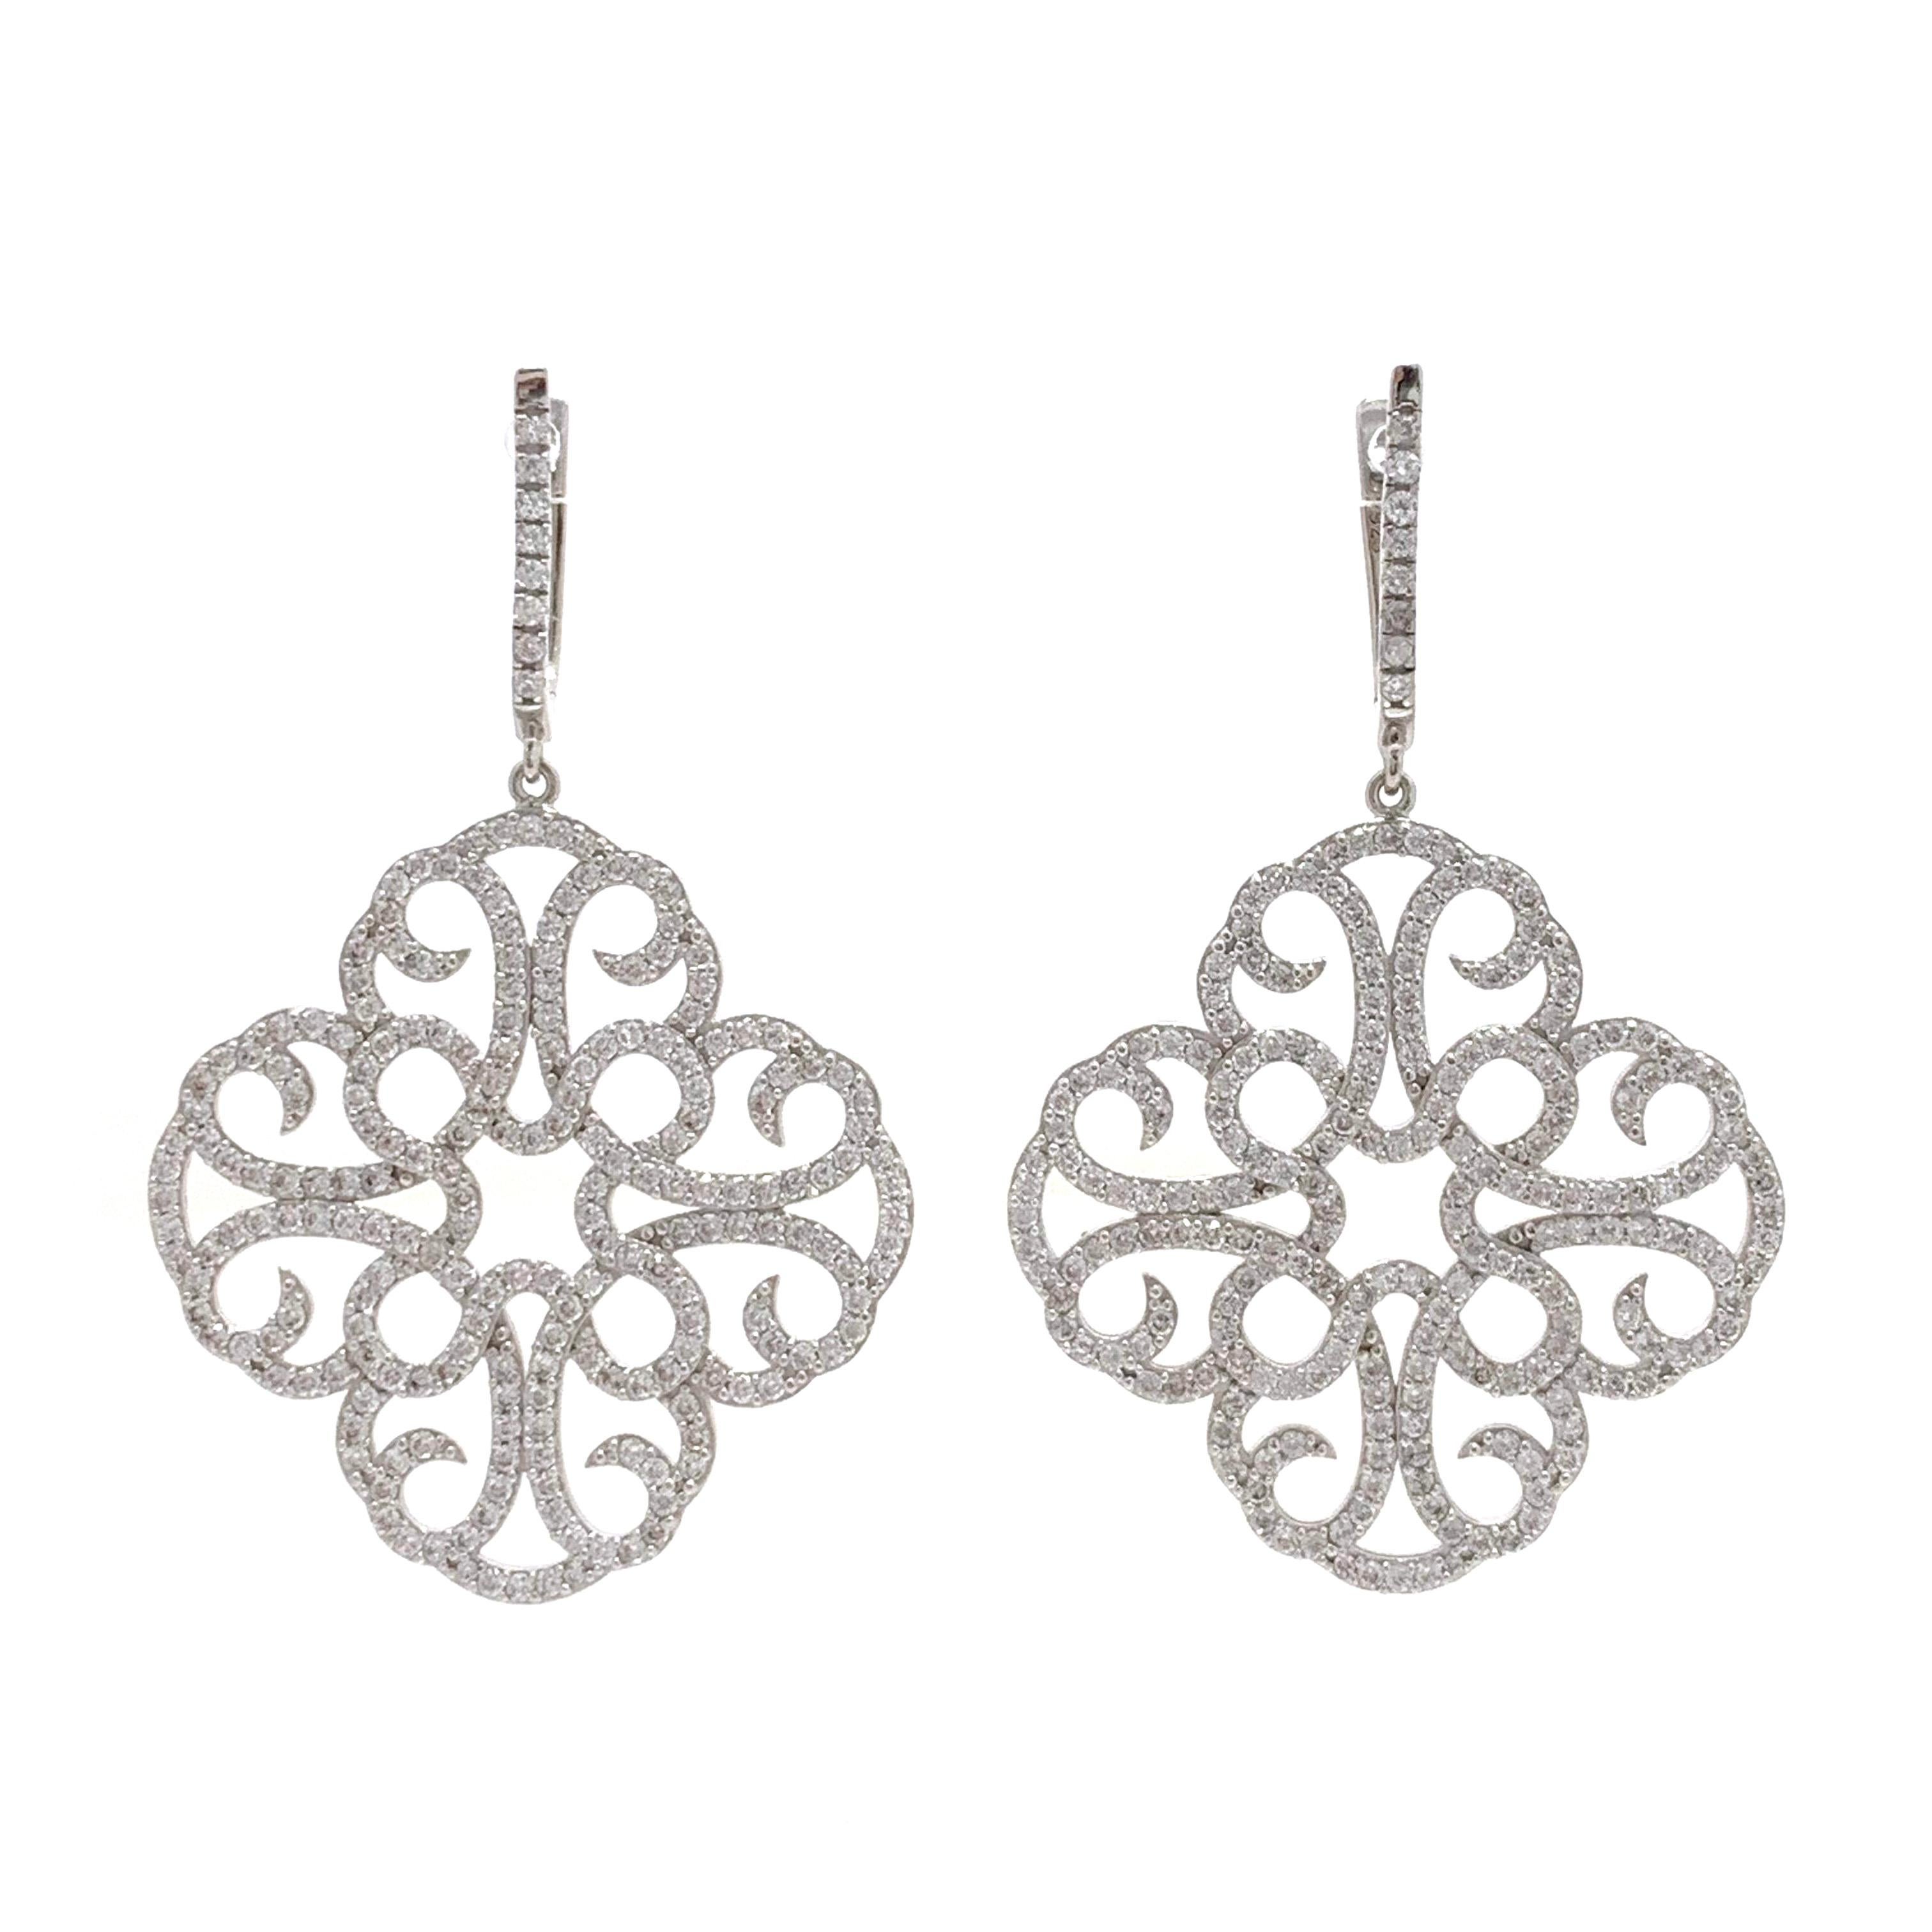 Large Clover Faux Diamond Drop Sterling Silver Earrings

The earrings feature over 400 pcs of AAA quality round faux diamond cz , handset in platinum rhodium plated sterling silver.  Straight post with English lock closure. The earrings measured 2